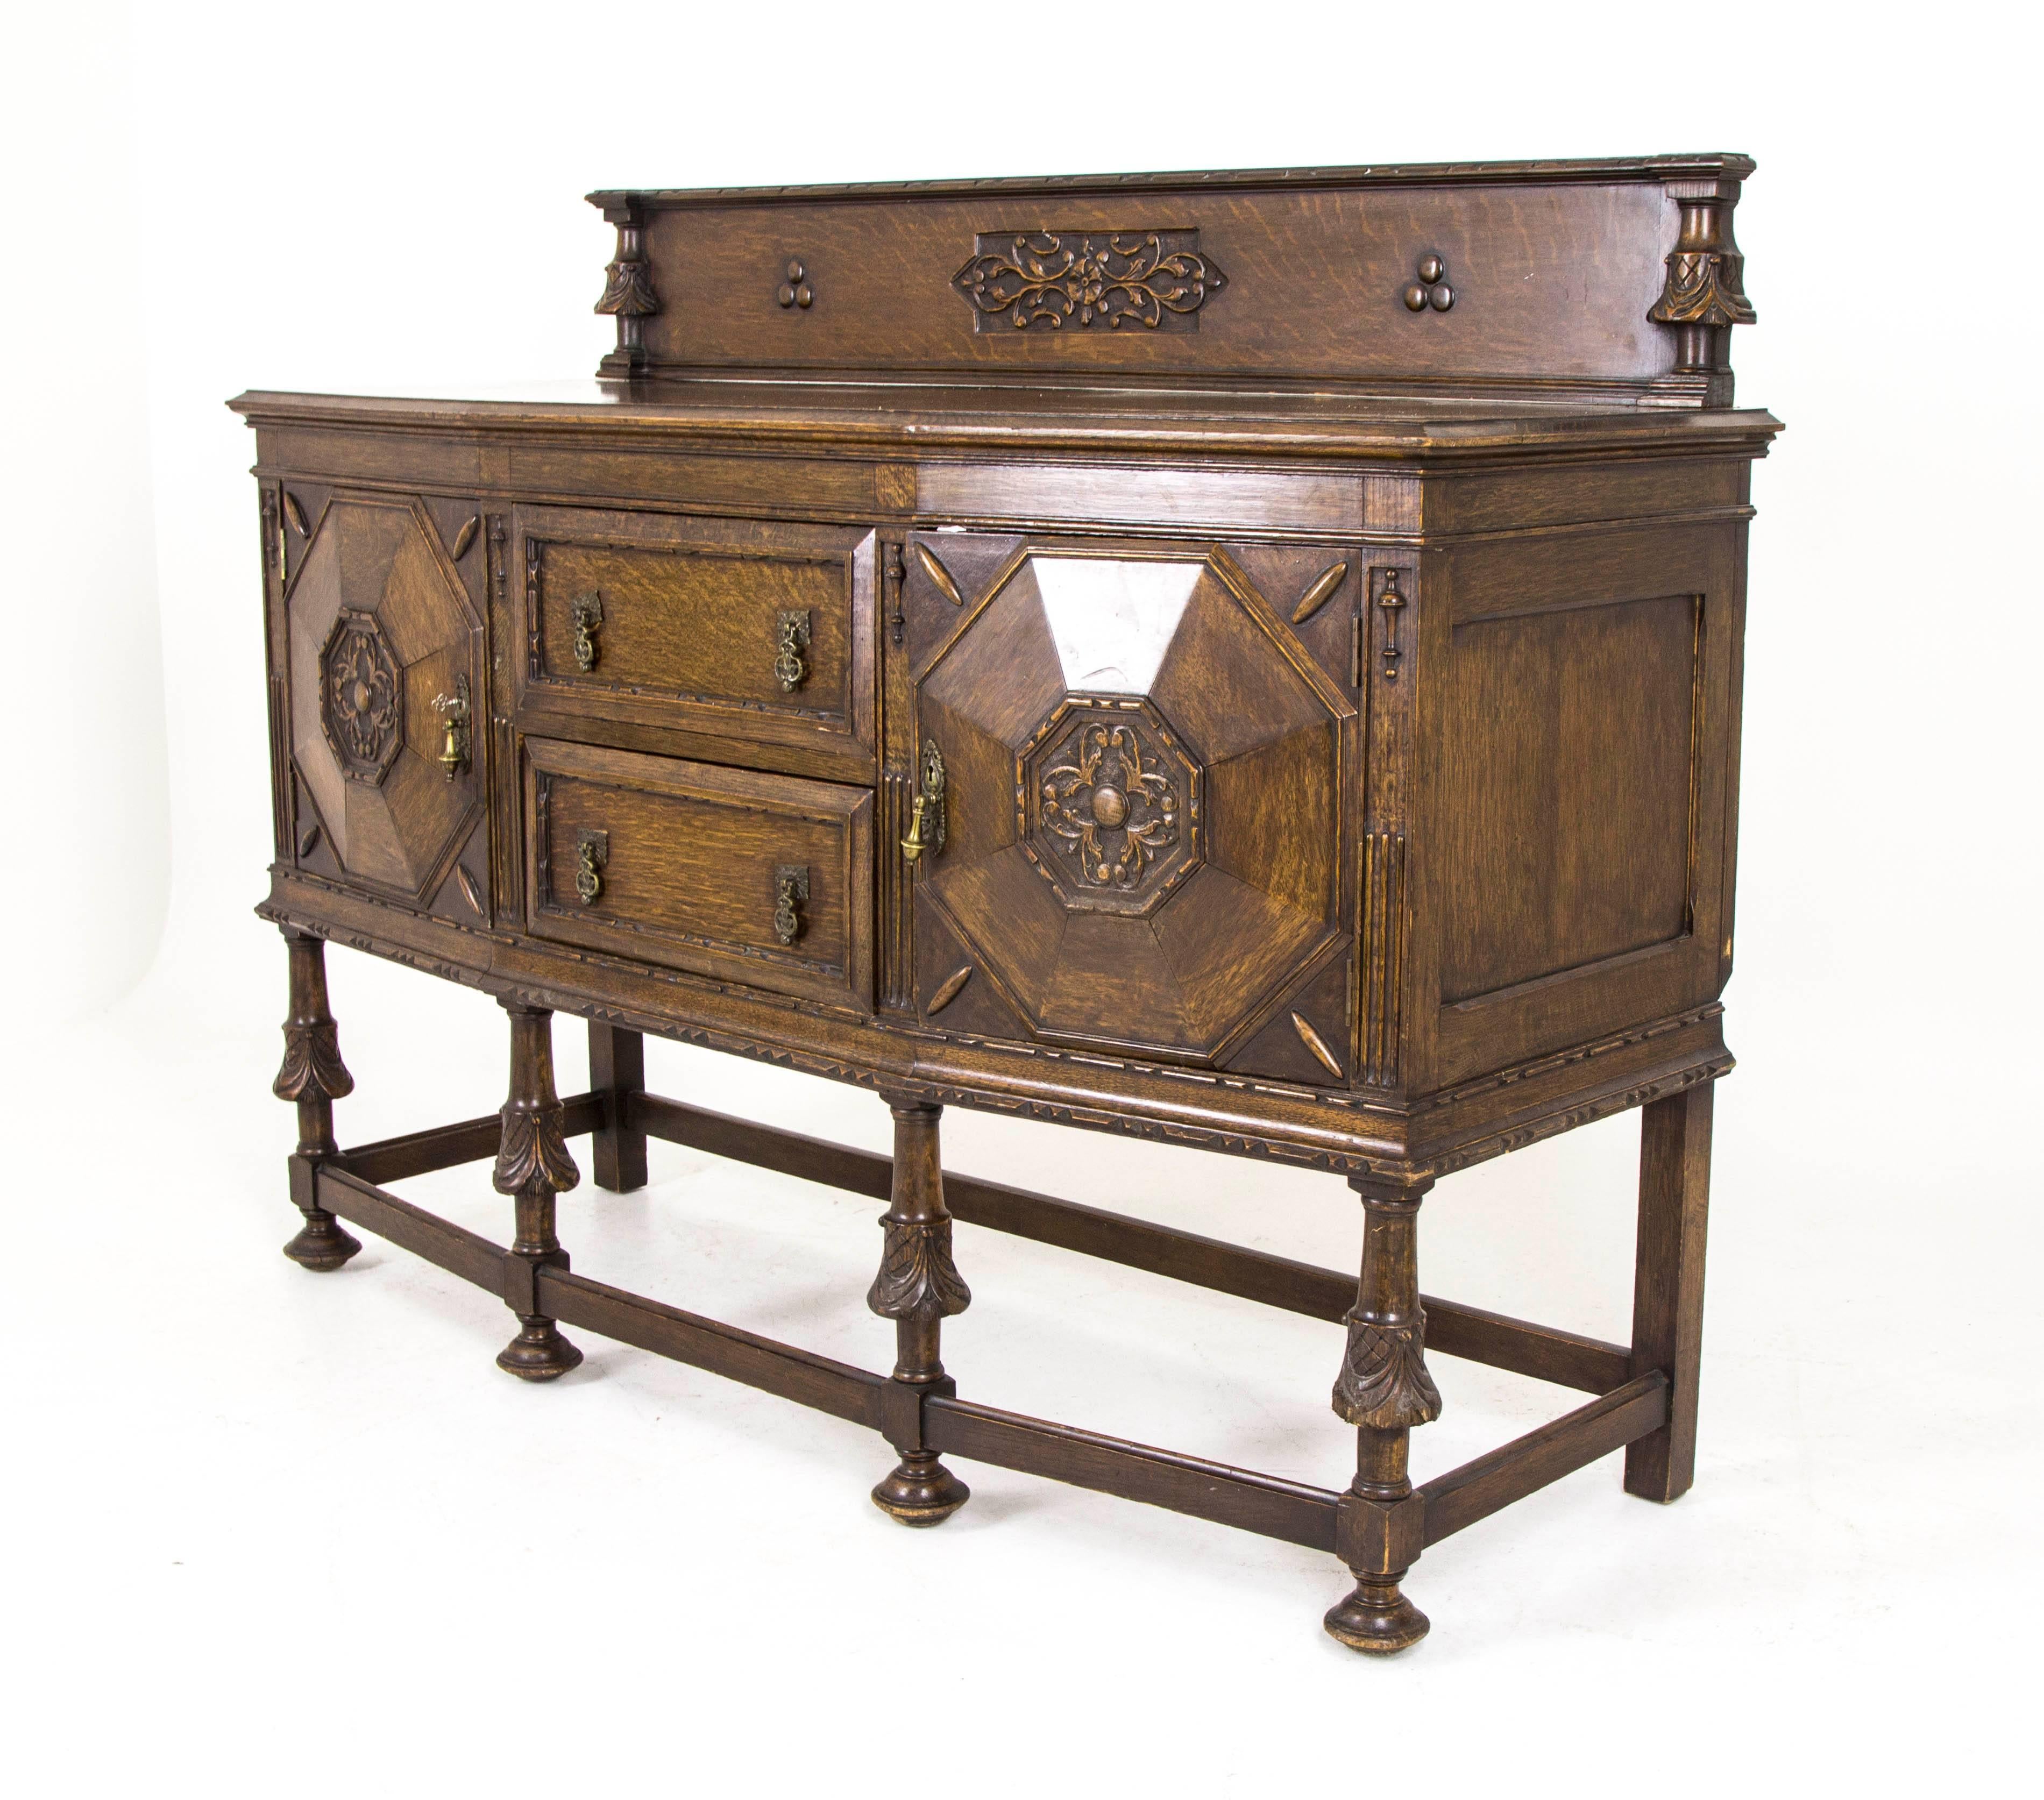 Scotland
1920s
Solid oak construction
Original medium oak finish
Tall decorative back
Shaped top with moulded edges
Below two centre drawers
Flanked on either side by cupboards with shelving and slideout decanter drawer
All supported by